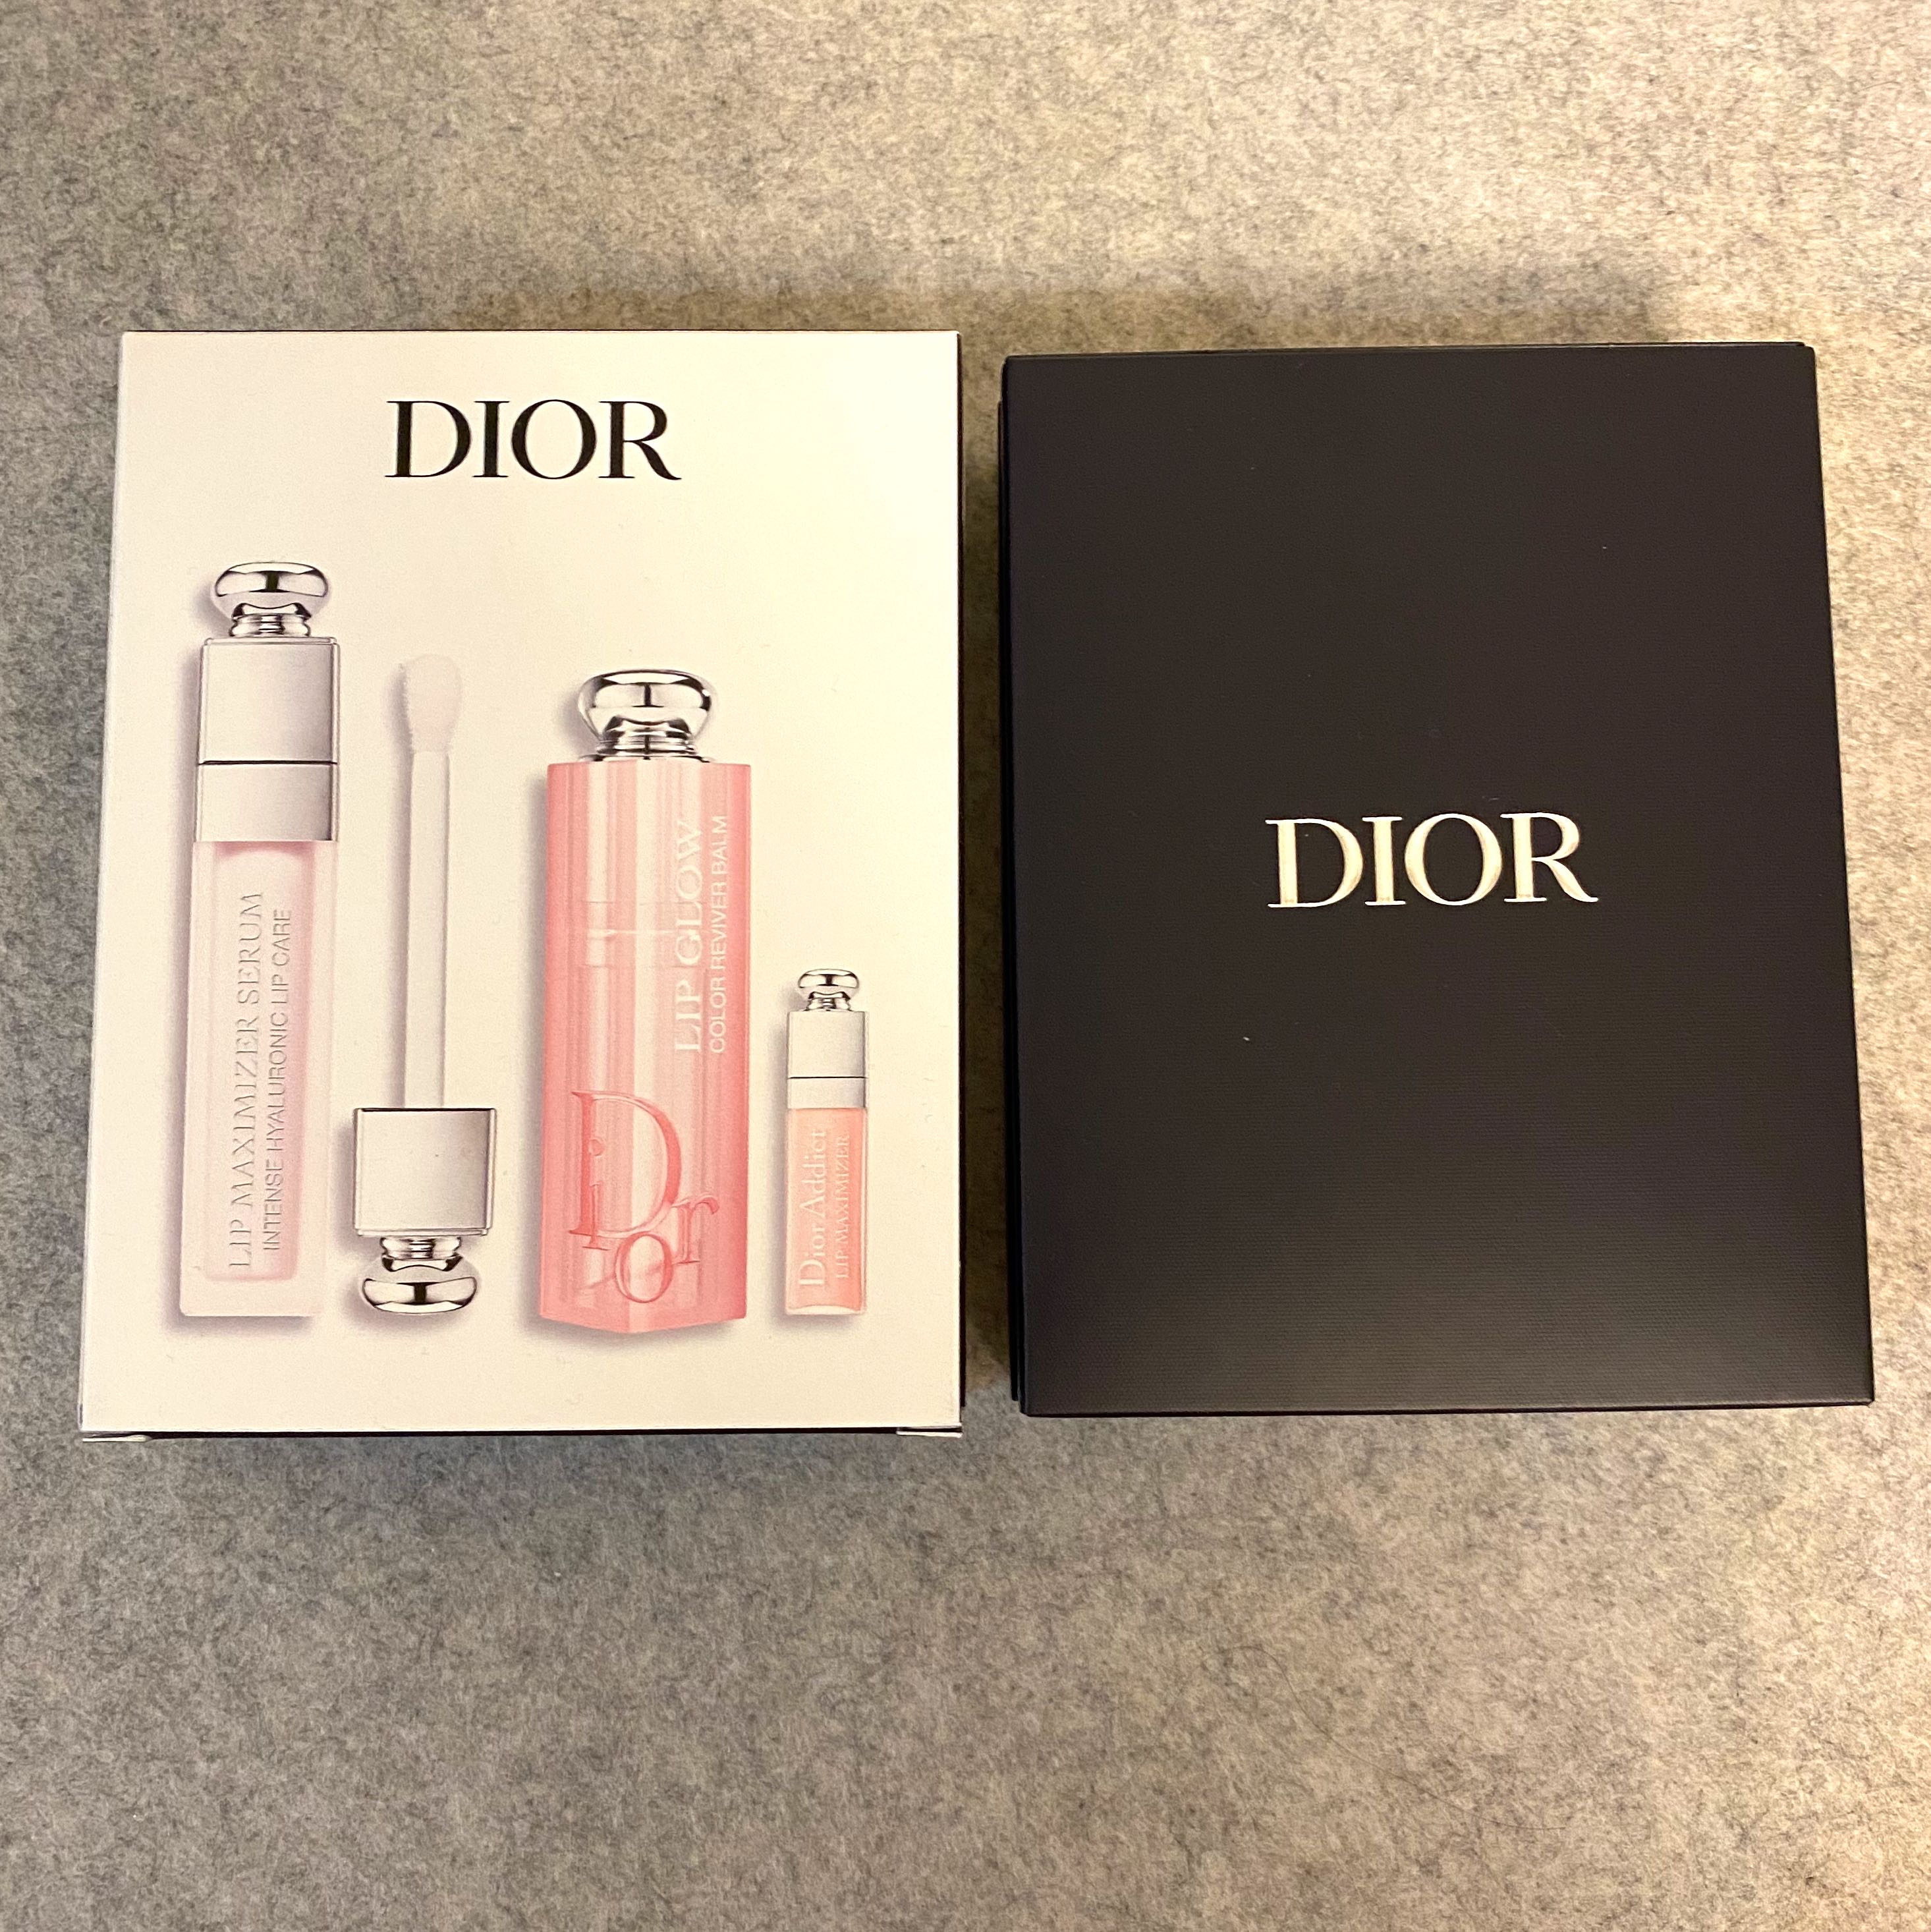 BNIB Dior Addict Natureal Glow Lip Essentials / Dior Lip Glow / Dior Lip  Maximizer / Dior Lip Maximizer Serum / Dior Addict Set with Receipt, Beauty  & Personal Care, Face, Makeup on Carousell